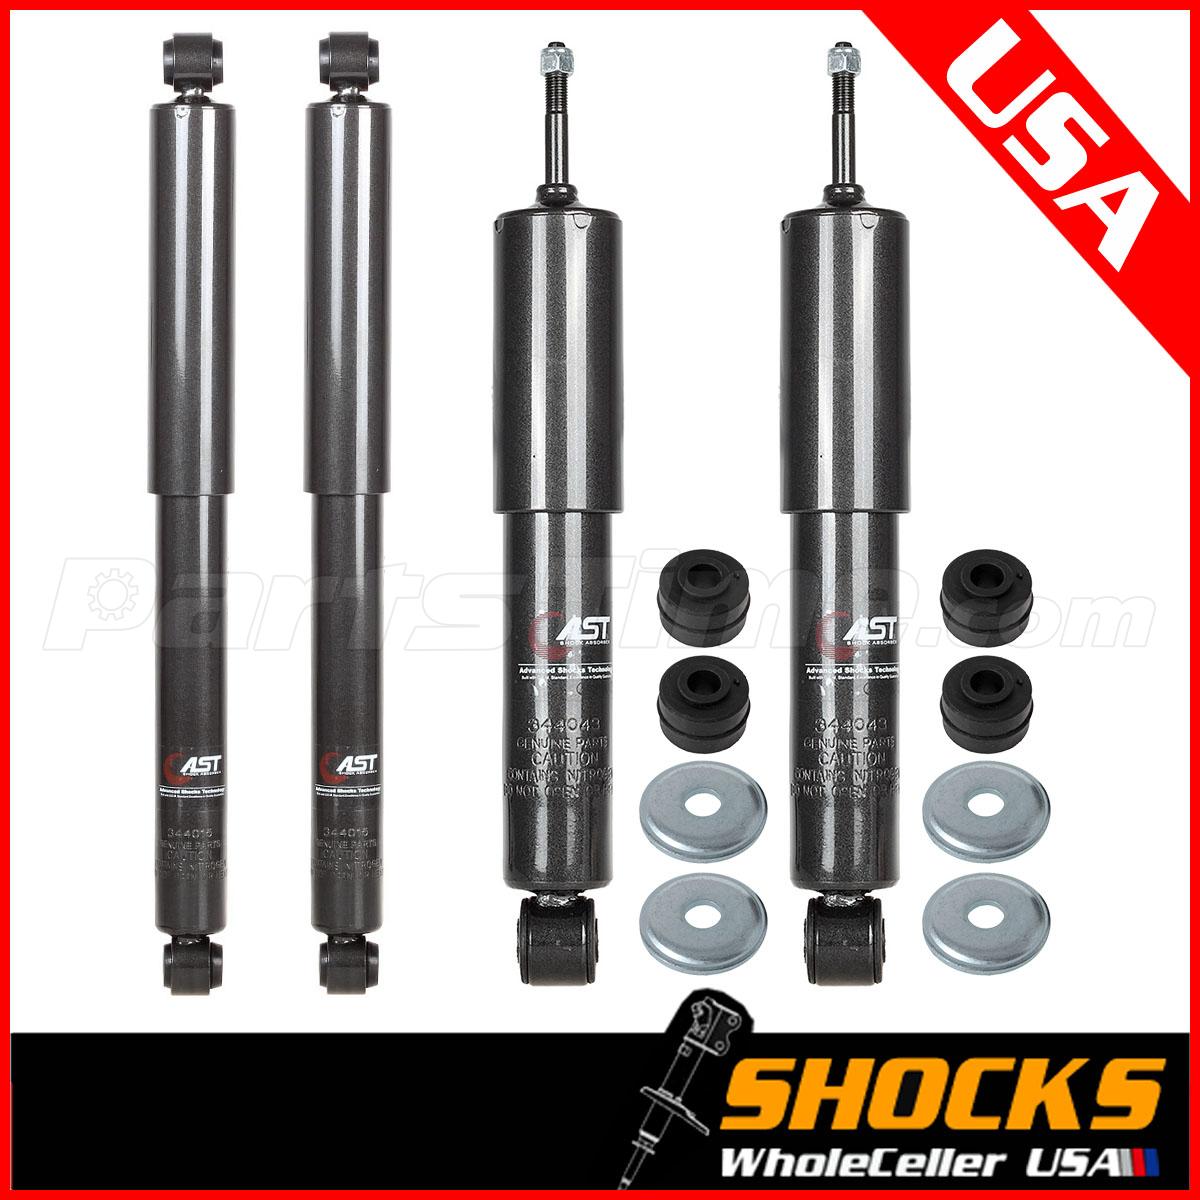 Best replacement shocks for nissan xterra